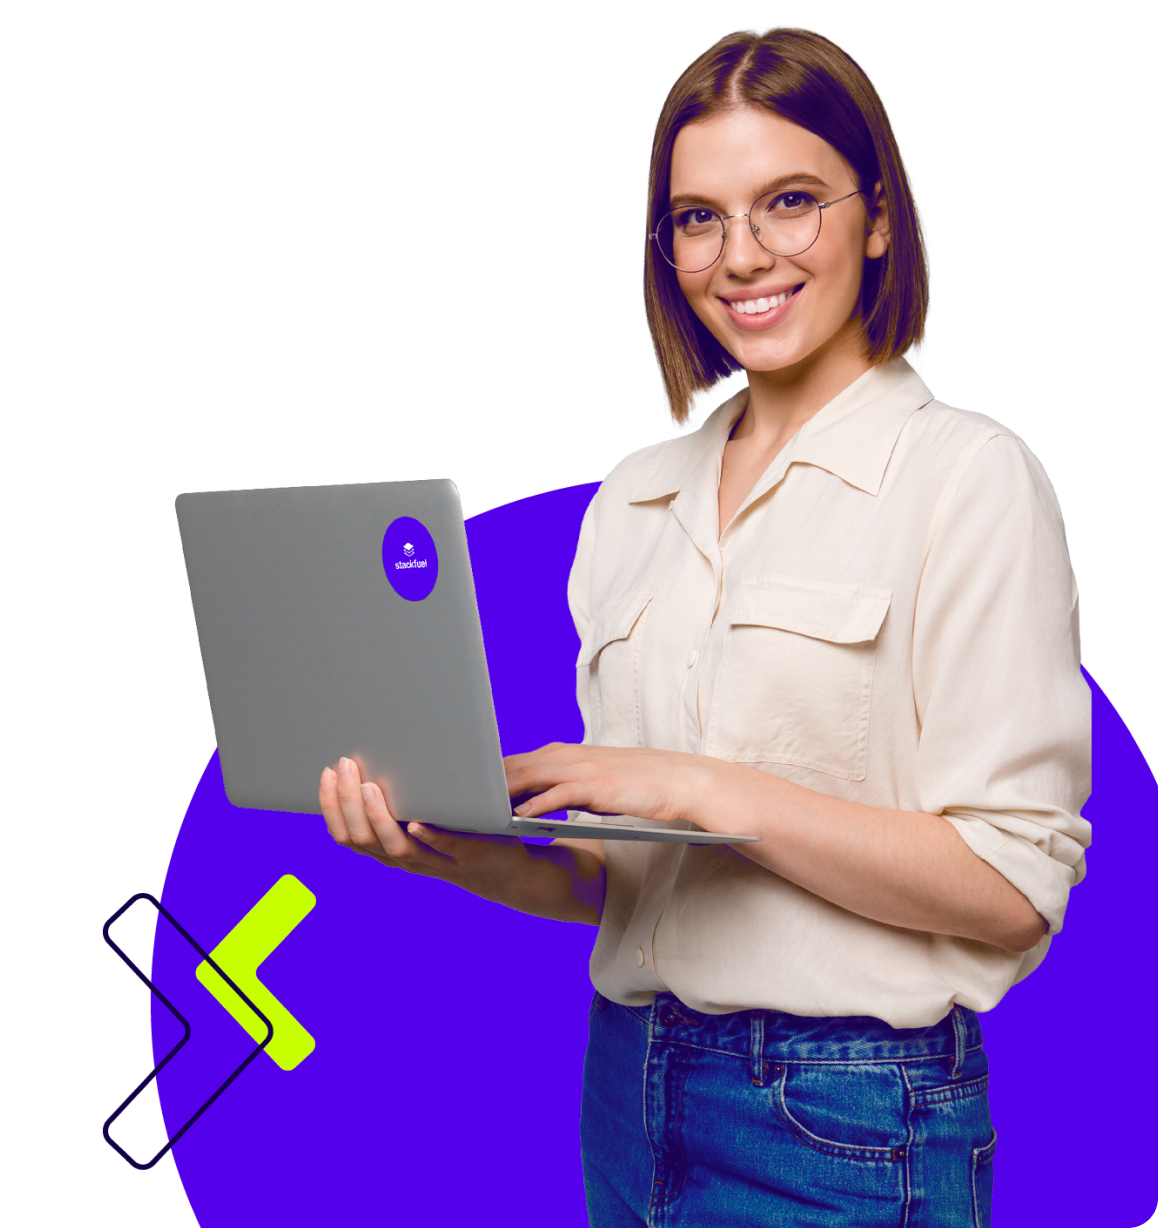 Young professional woman with laptop, smiling in casual attire against a purple background.